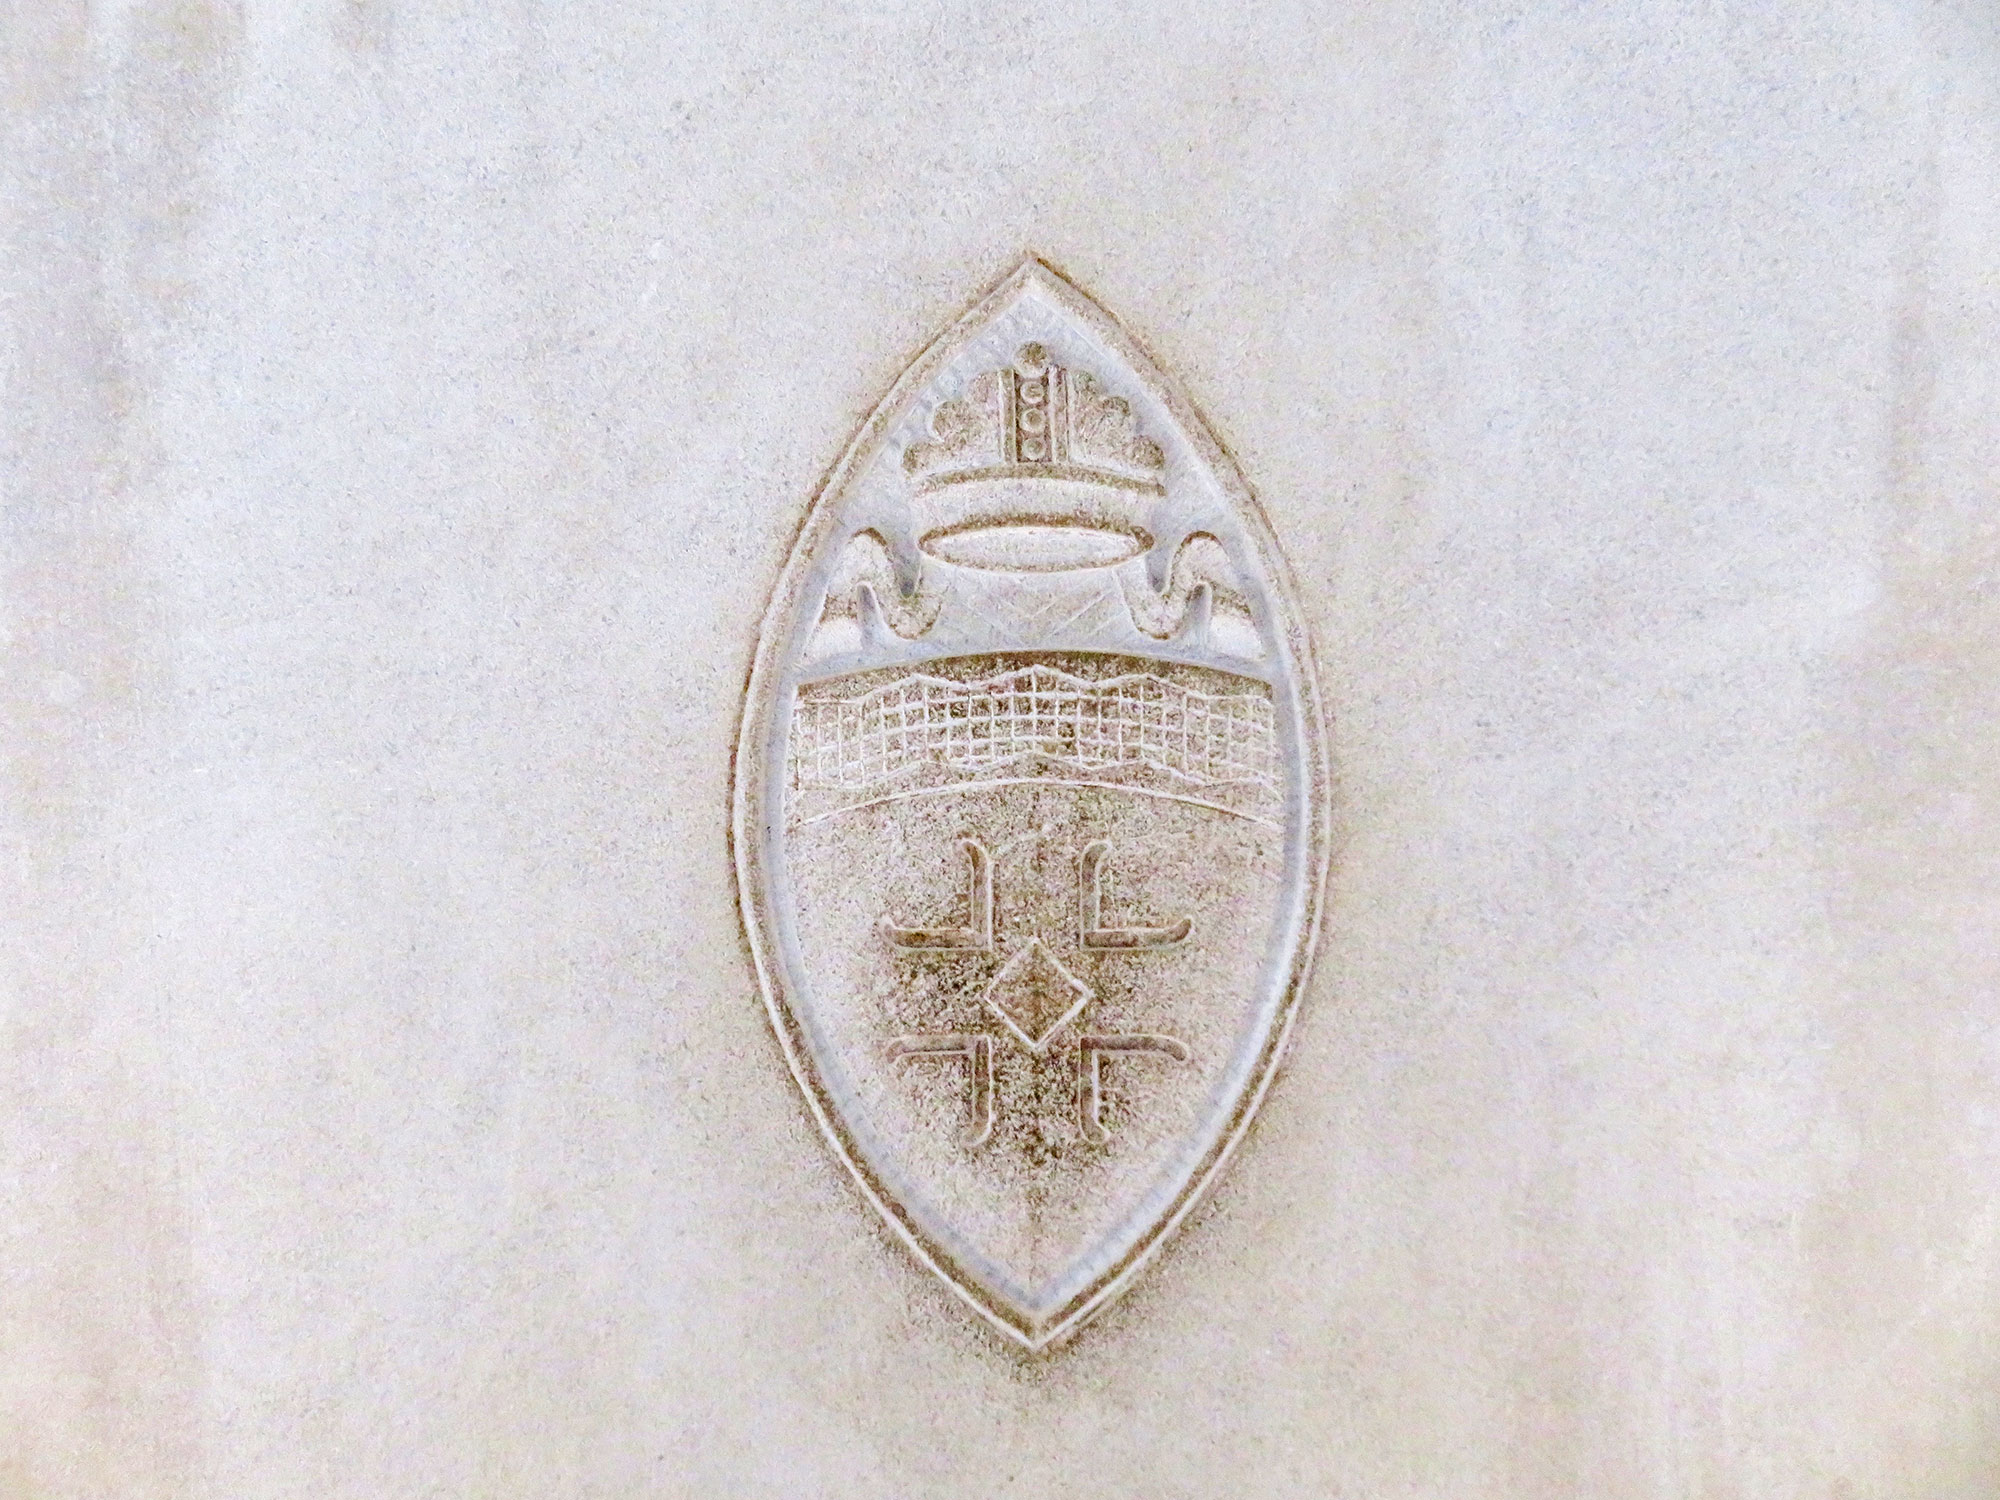 A detail of stone crest at the Washington National Cathedral.